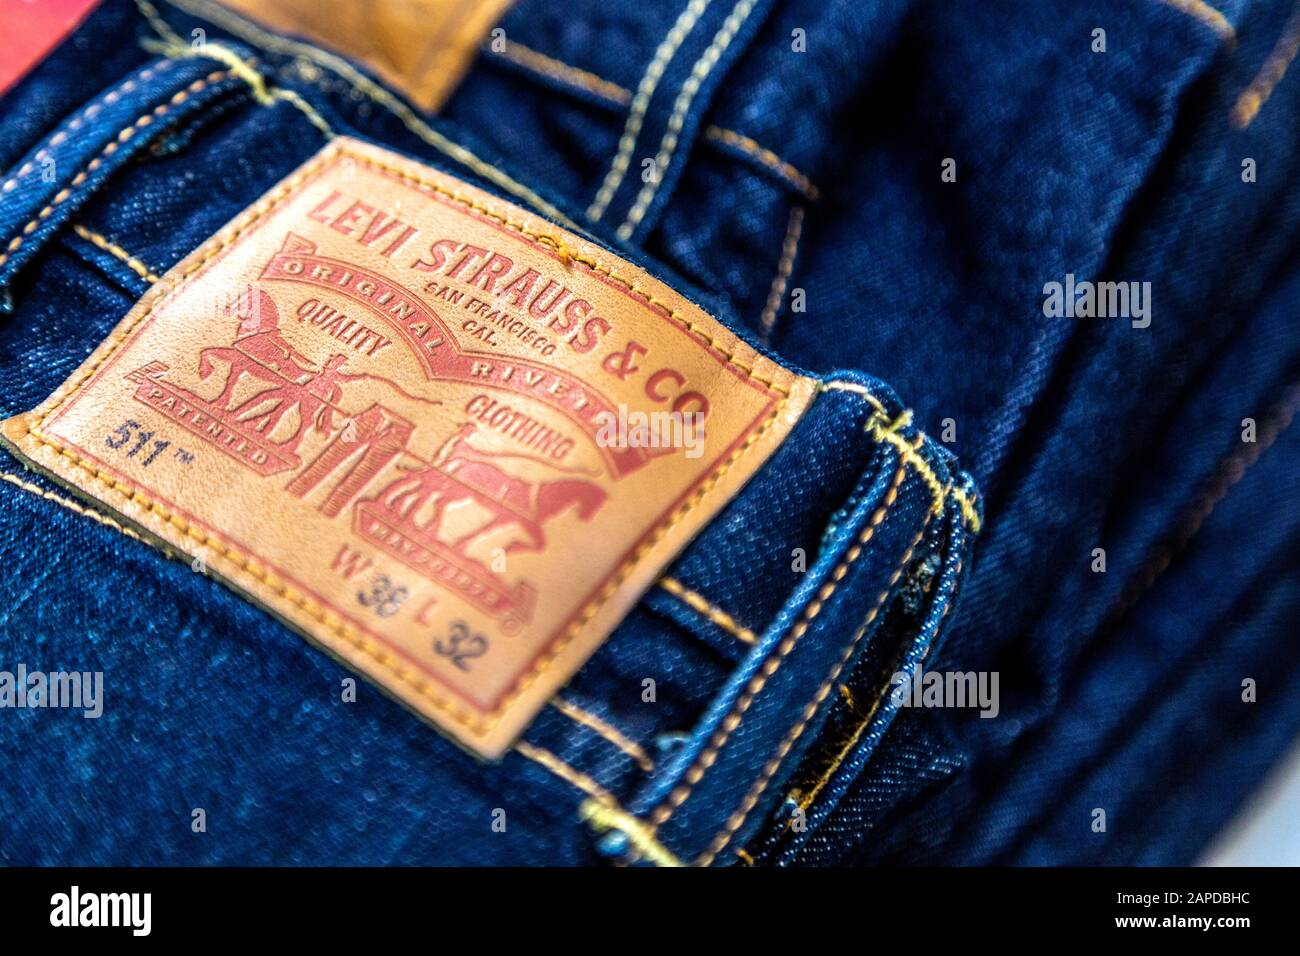 Close-up of the label at the back of Levi's jeans Stock Photo - Alamy